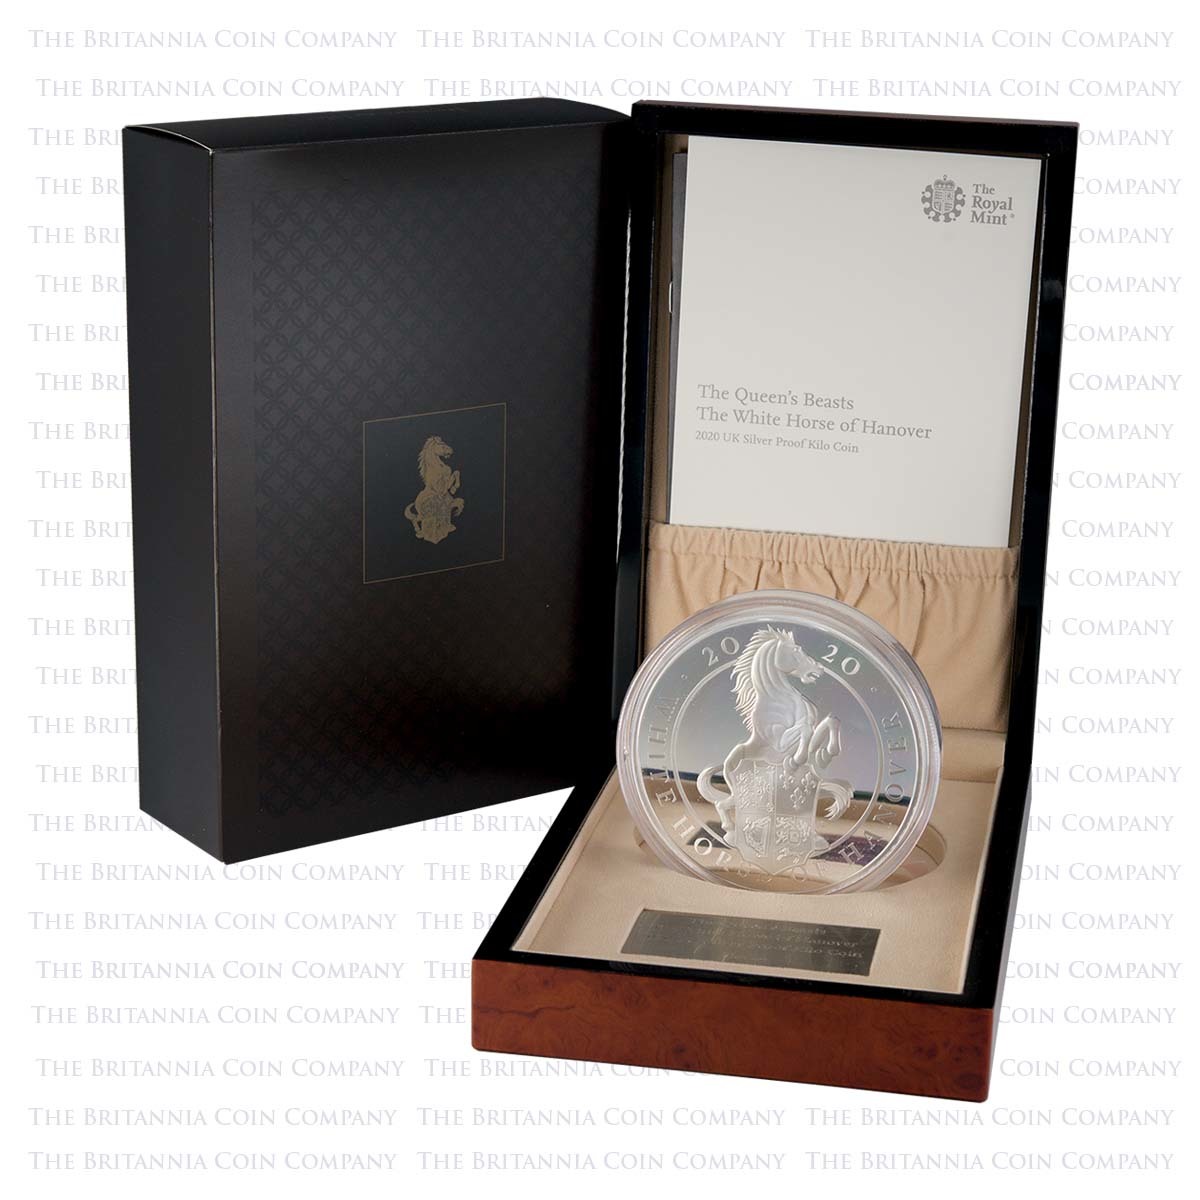 2020 Queen’s Beasts White Horse of Hanover 1 Kilo Silver Proof Boxed